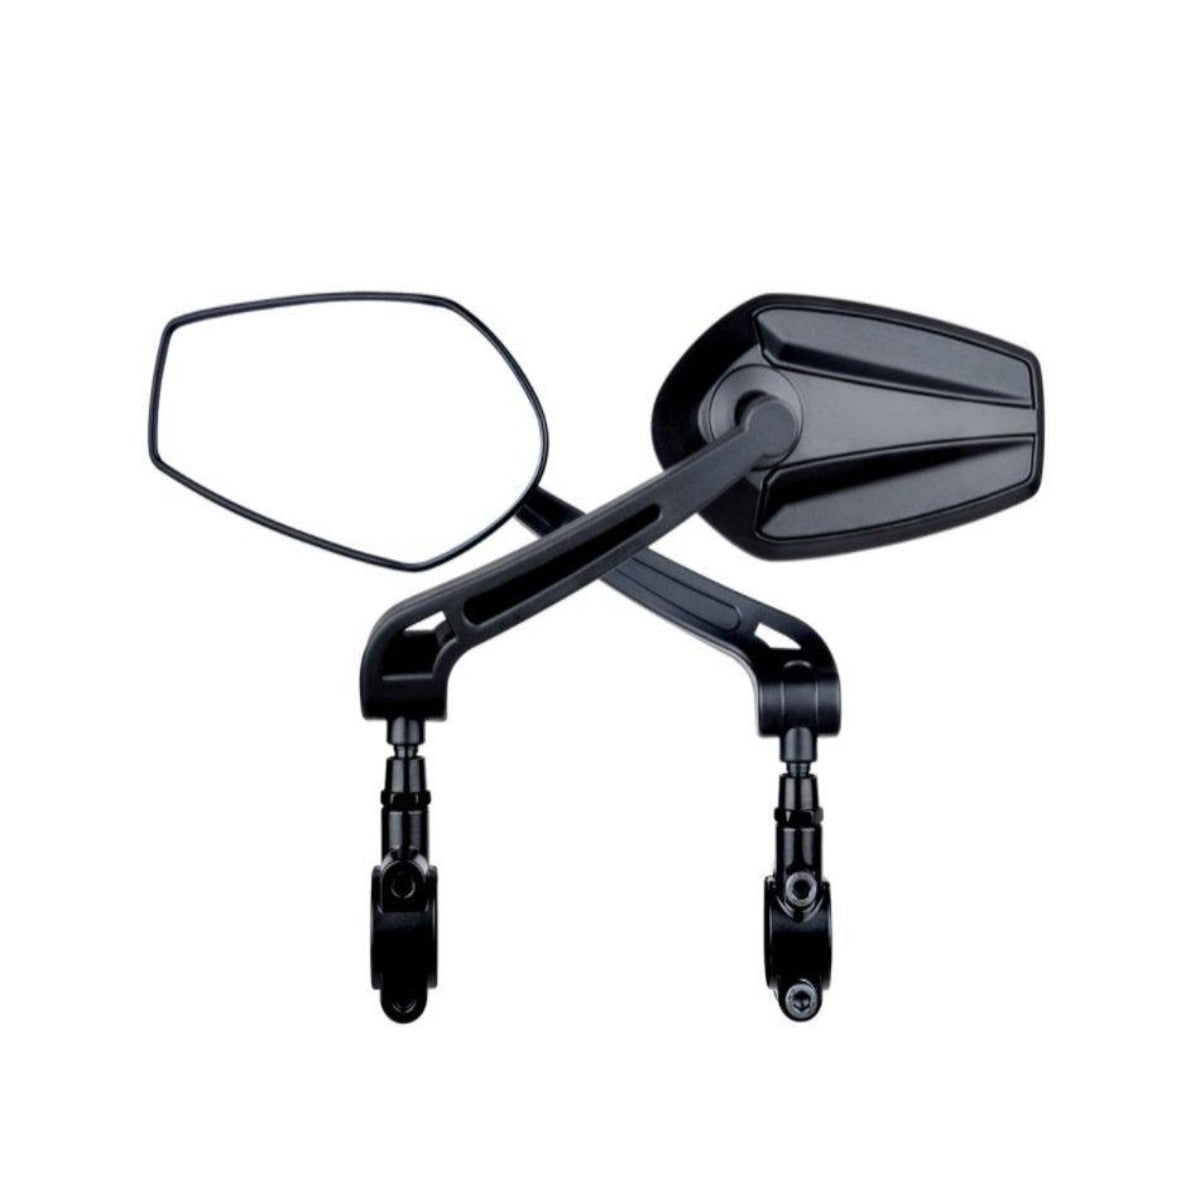 E-Bike HD Wide-angle Rearview Mirror (A pair)